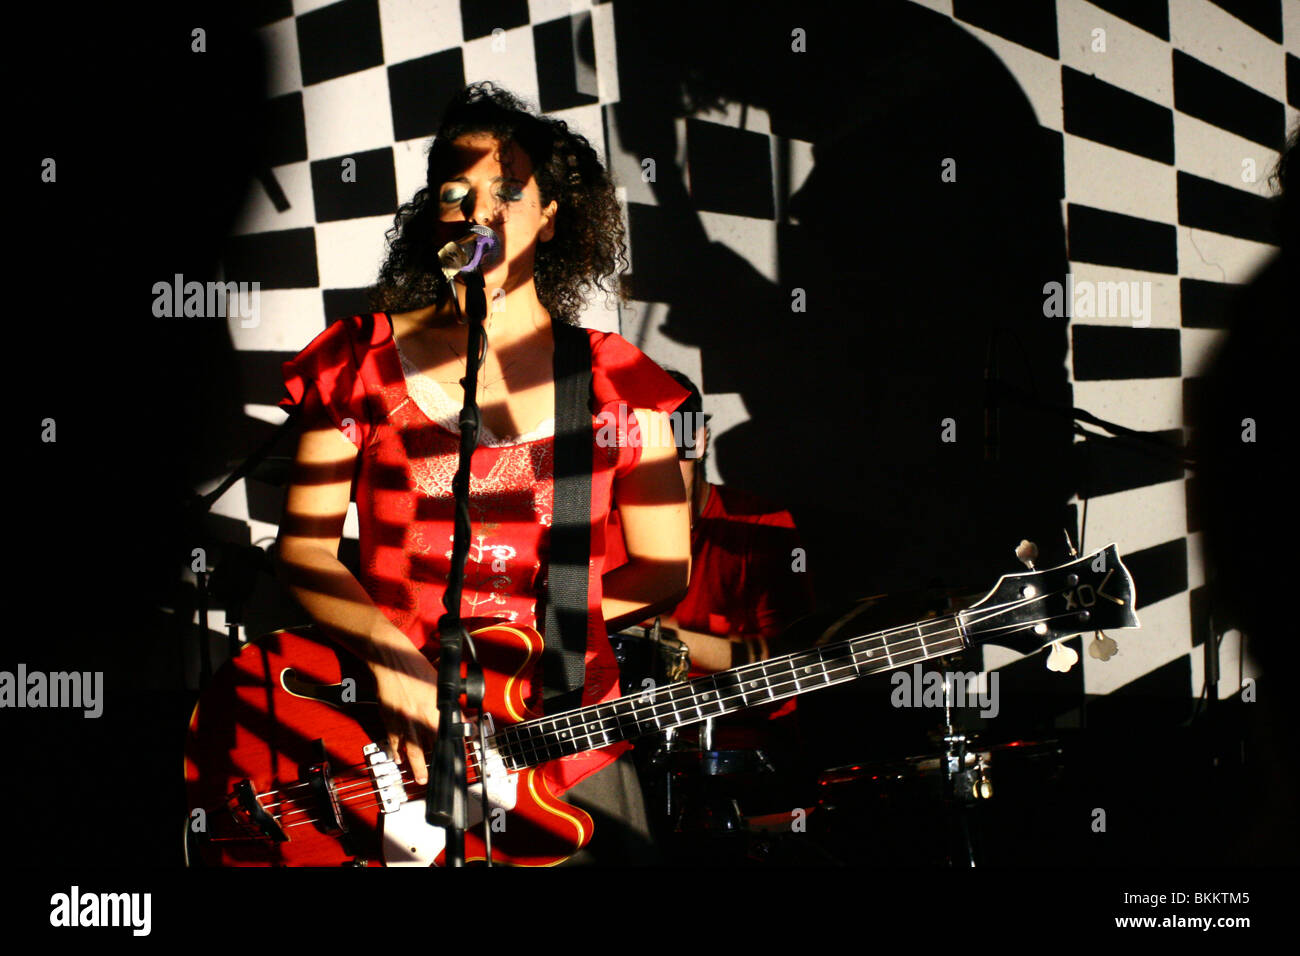 The Israeli , Brooklyn Indie rock band Pink noise at a performance in Tel Aviv. Sep. 9, 2006. Stock Photo